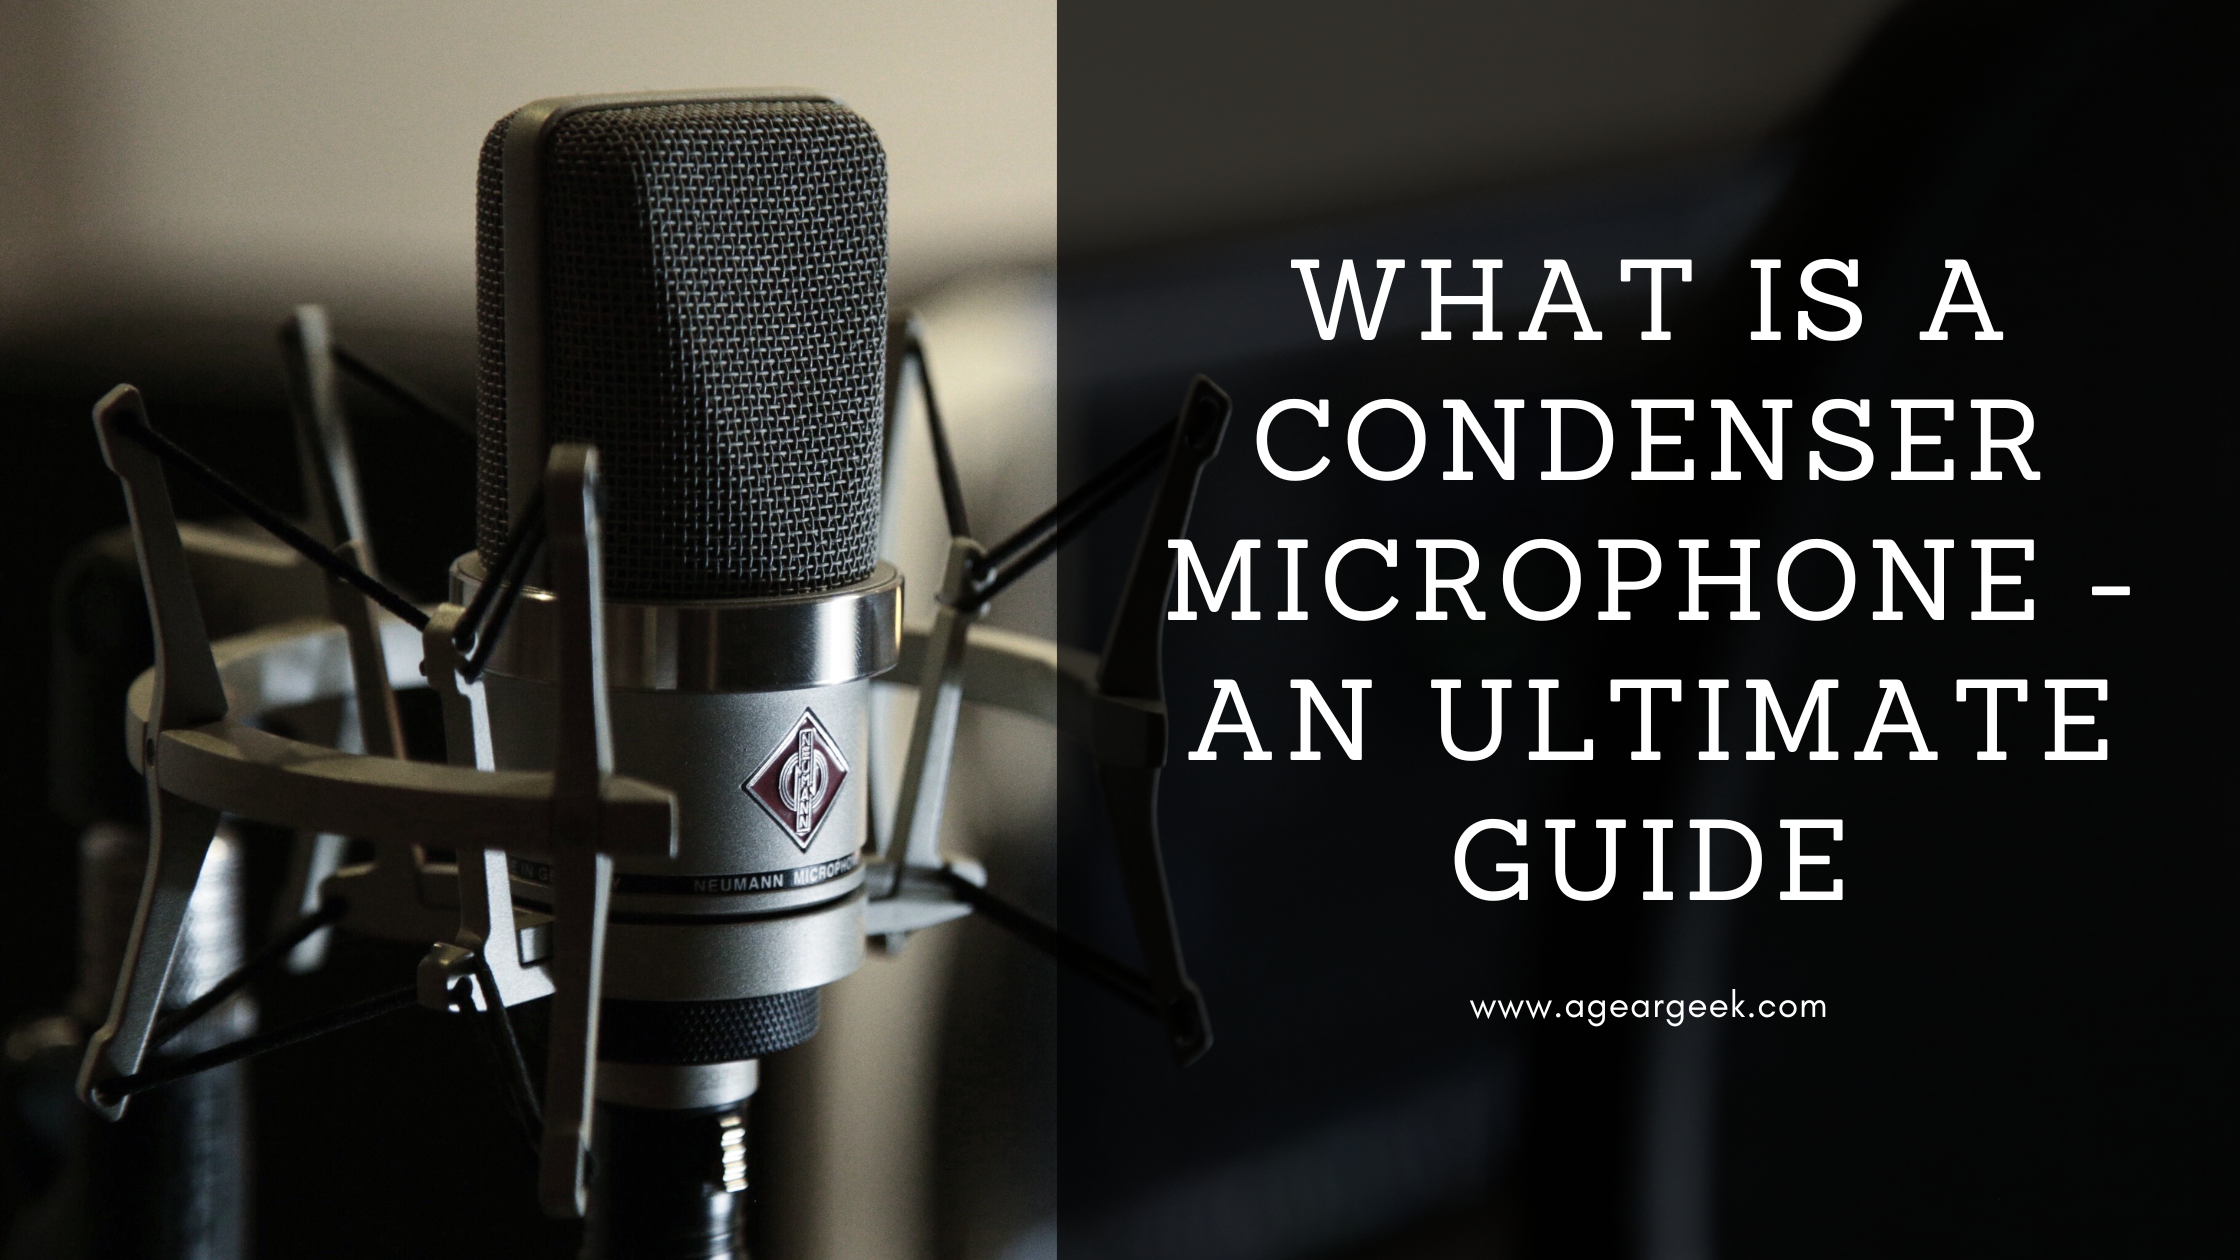 What is a condender microphone